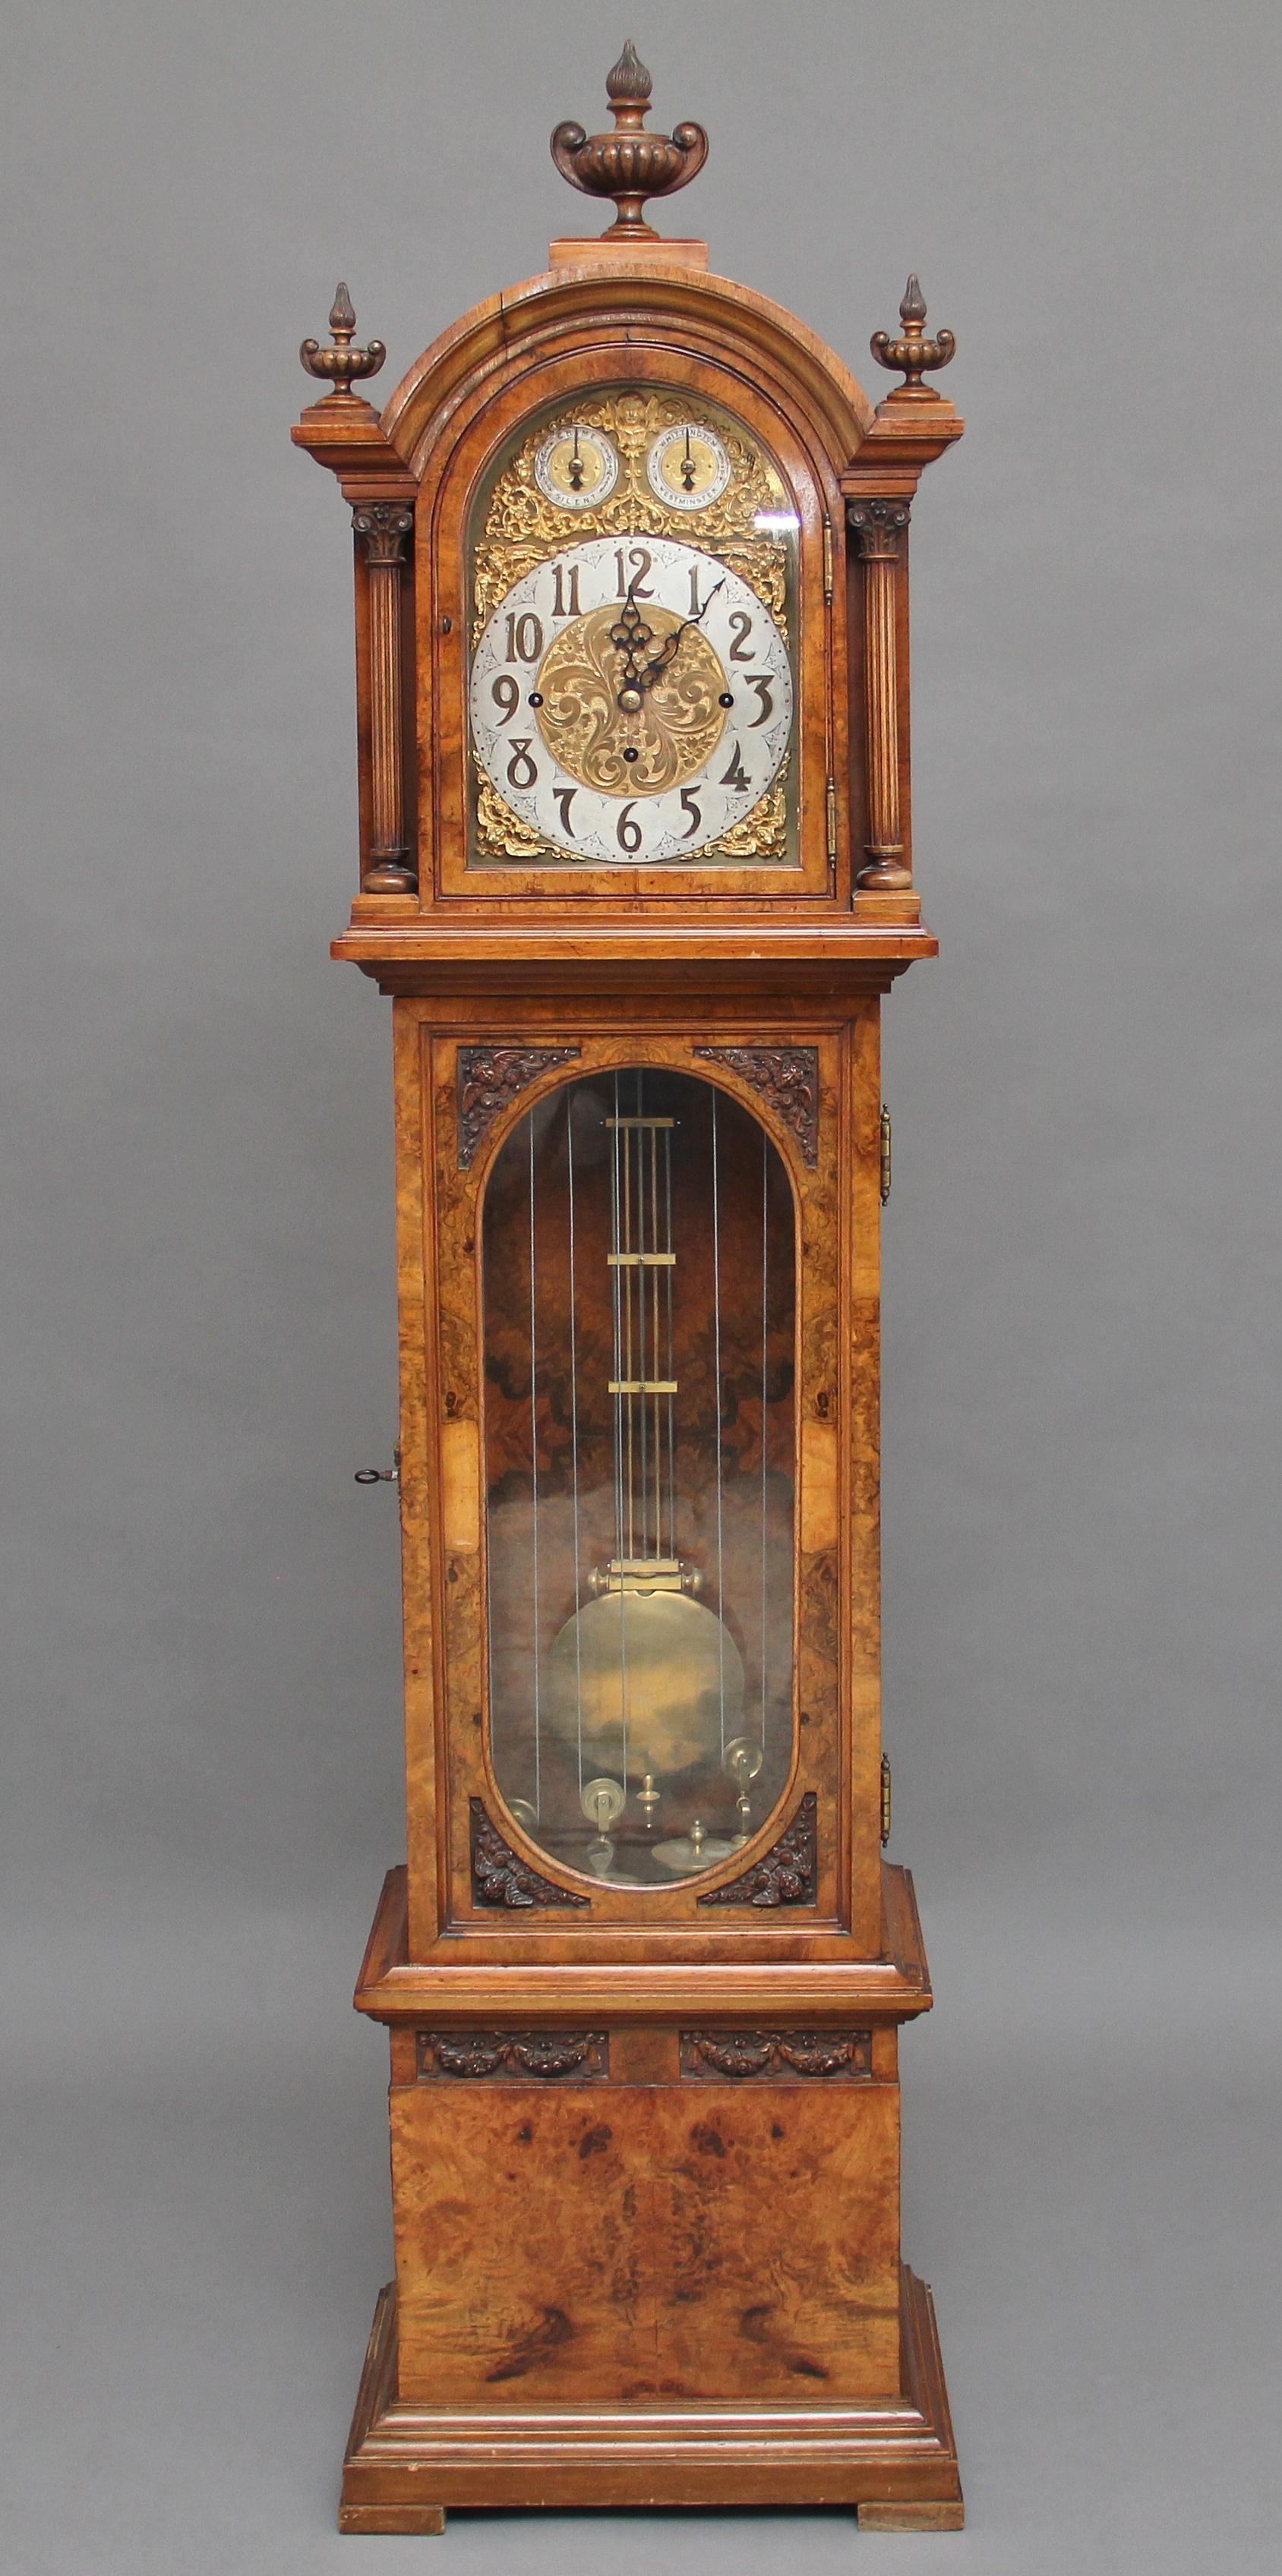 A lovely quality early 20th century walnut Granddaughter clock, features a substantial three train dead beat escapement movement with Whittington and Westminster chime on eight gongs on the quarters and with an hourly strike on a single gong, fine